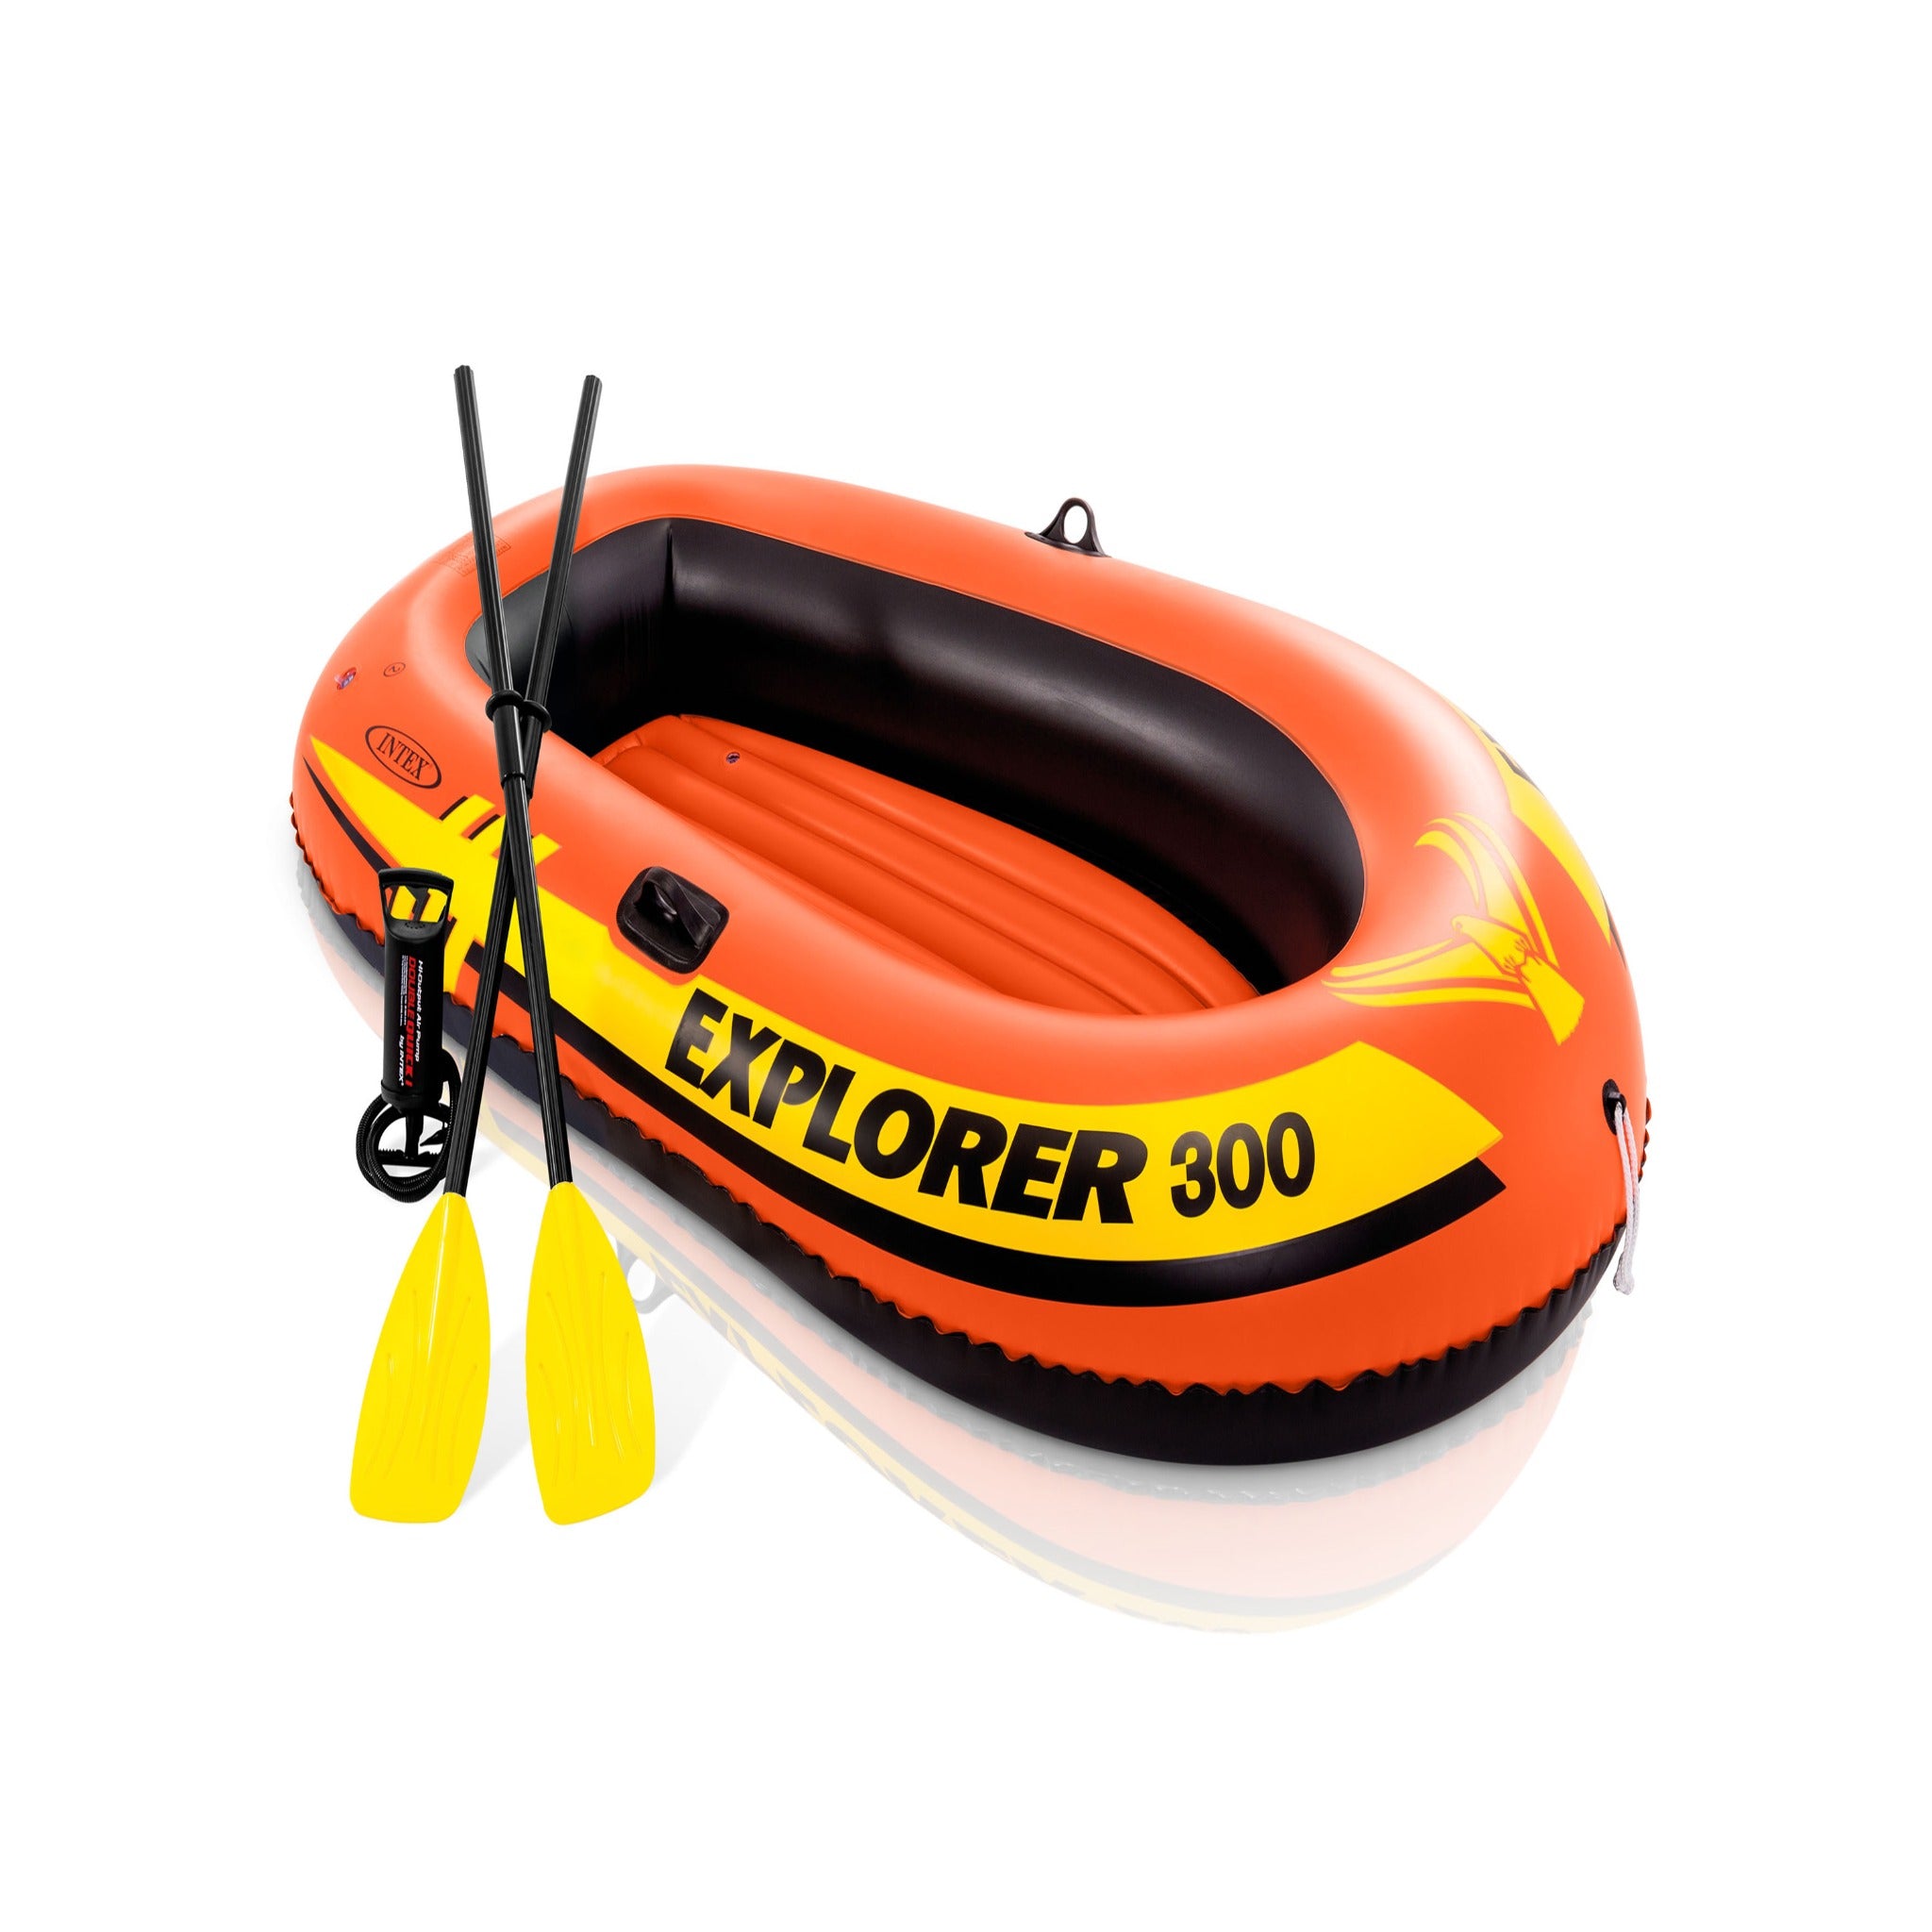 Intex Oars Boat 3-Person Set and Air Inflatable with Explorer 300